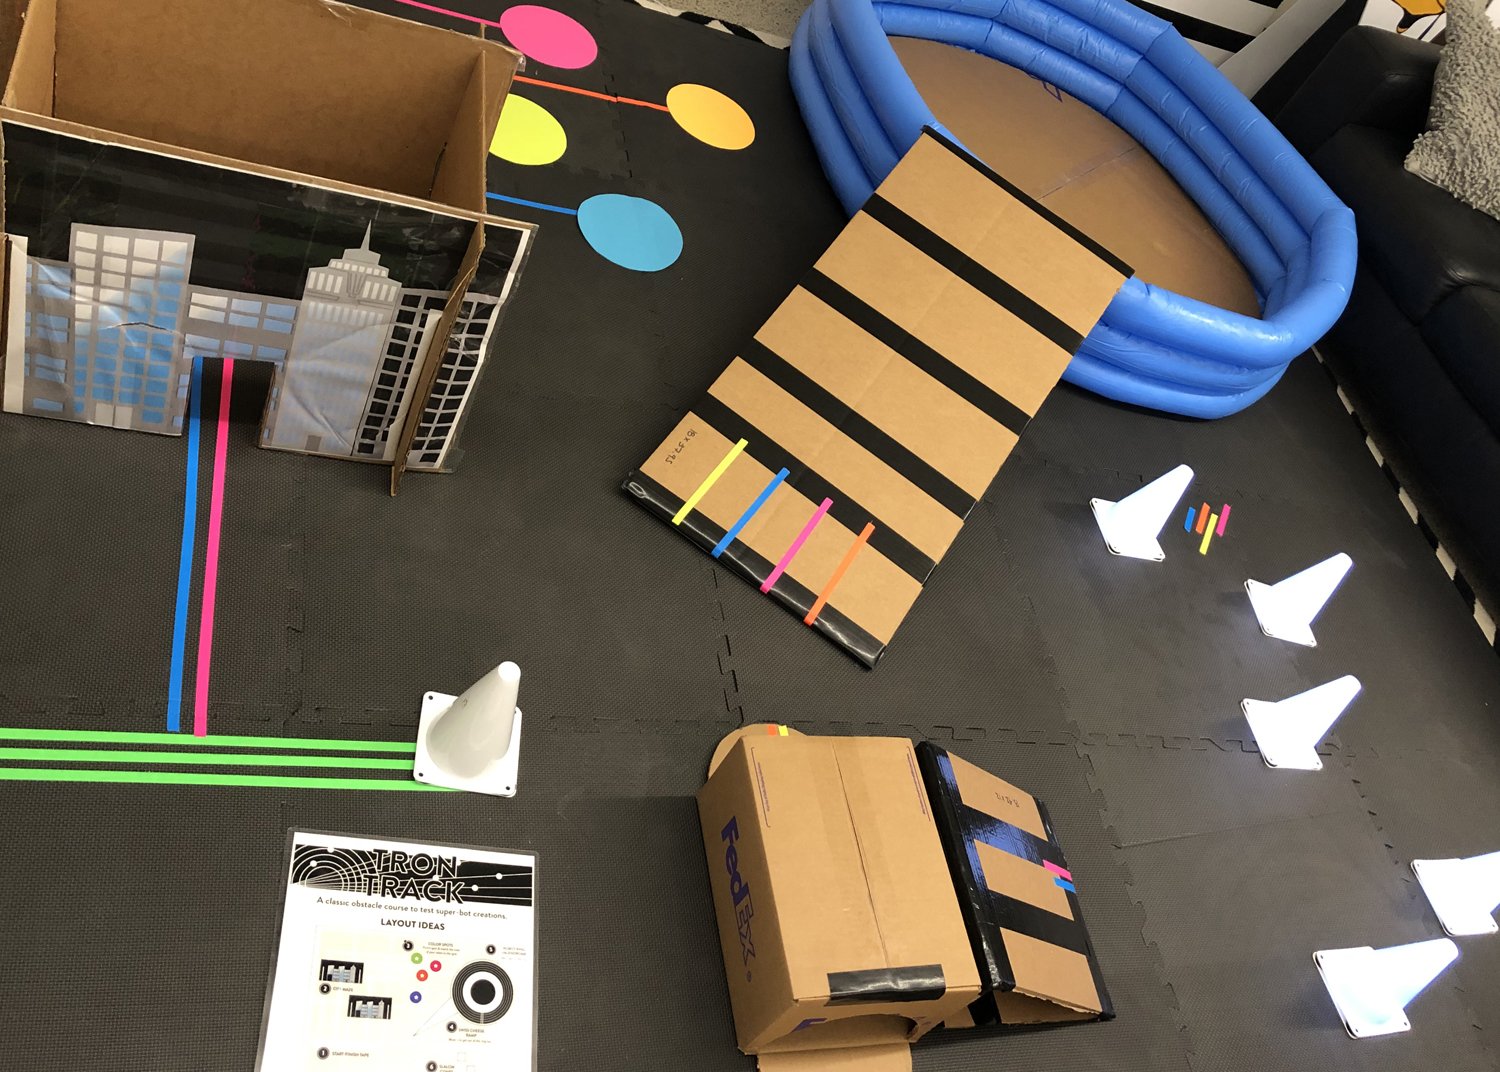   Obstacle prototypes created for user testing  